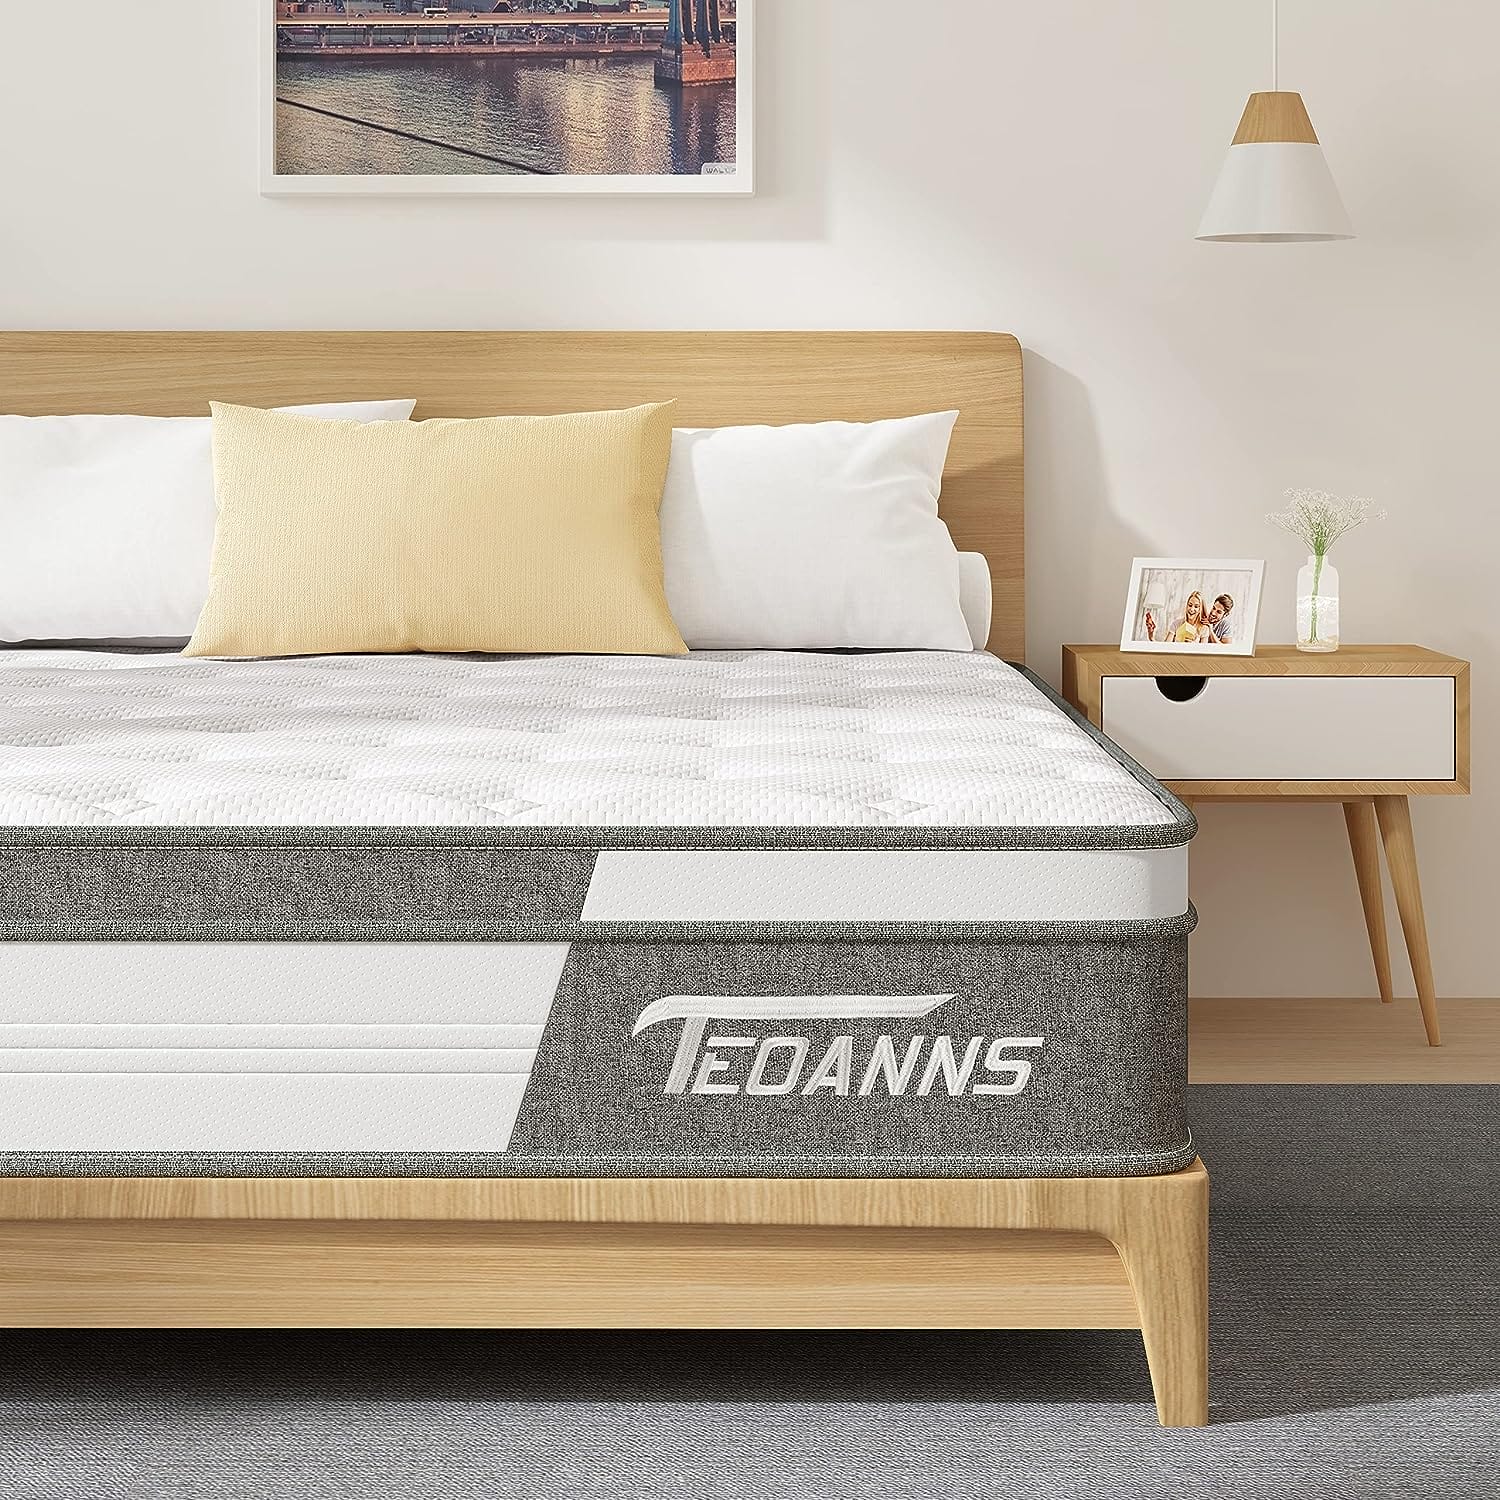 Teoanns Mattress Review: Unparalleled Comfort & Support